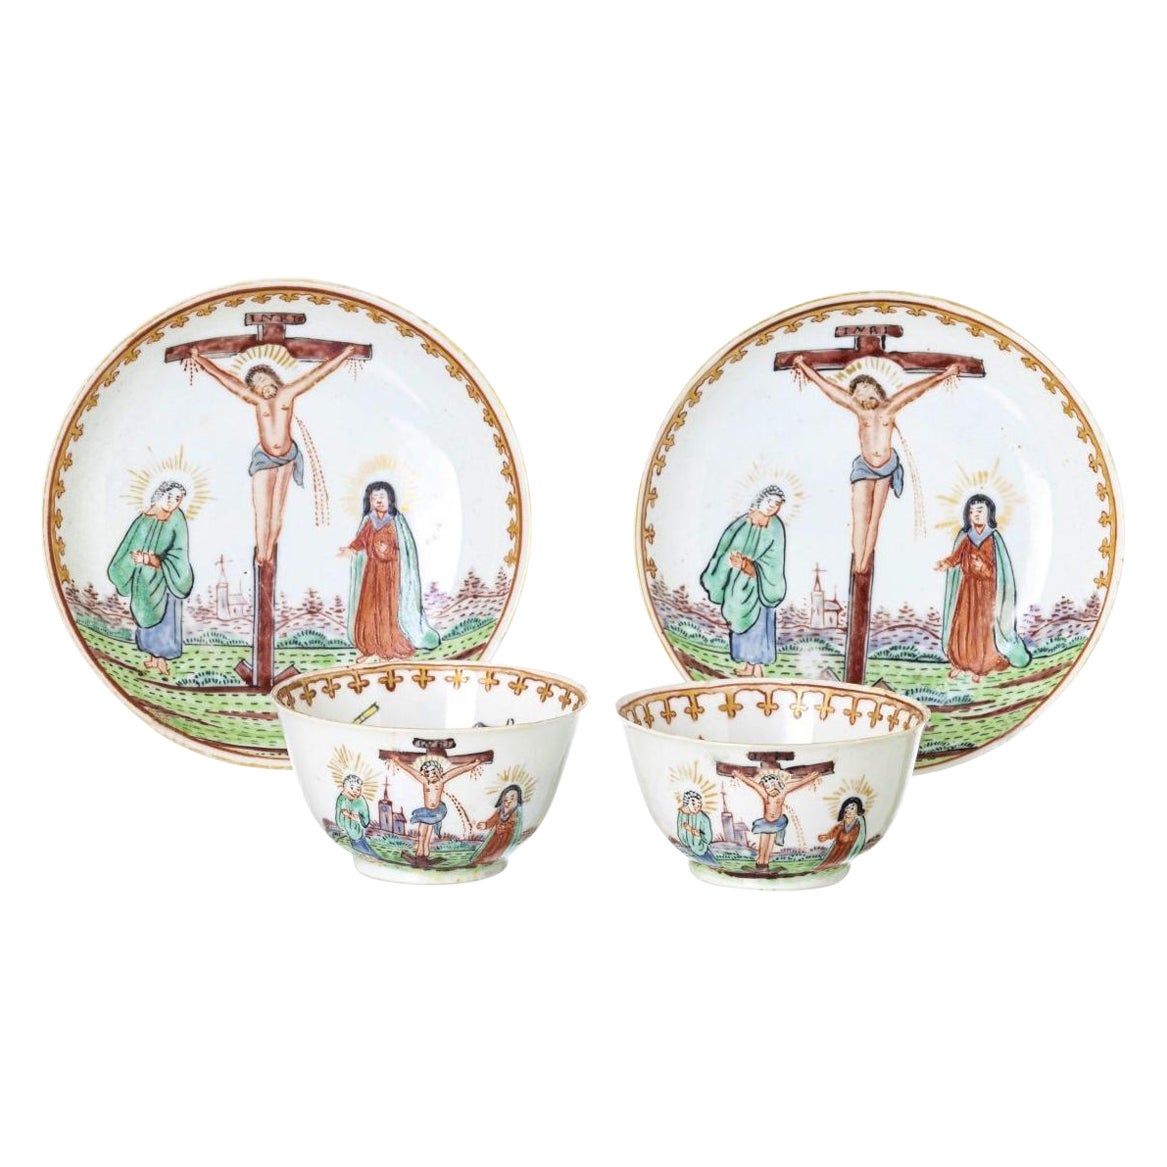  PAIR OF CUPS WITH SAUCER 18th century